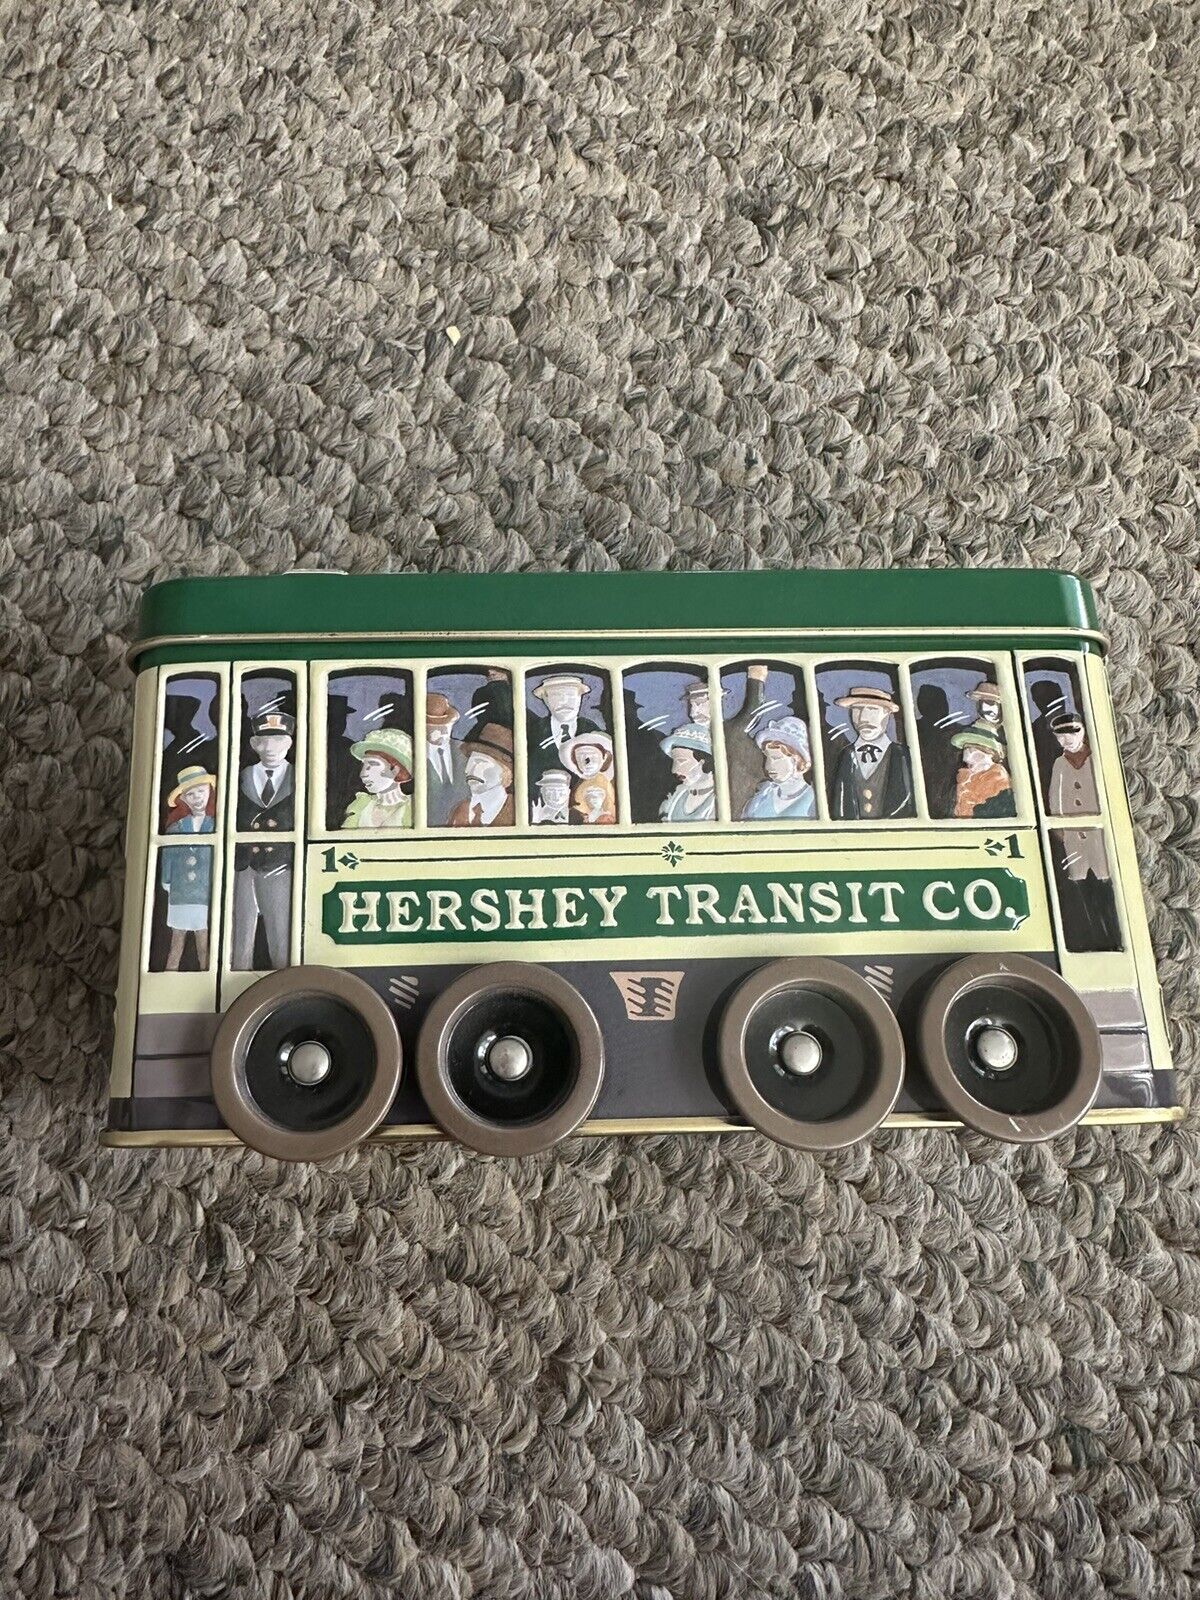 2002 Hershey Transit Co. Vehicle Series Canister Tin #3 Trolley Wheels Move 